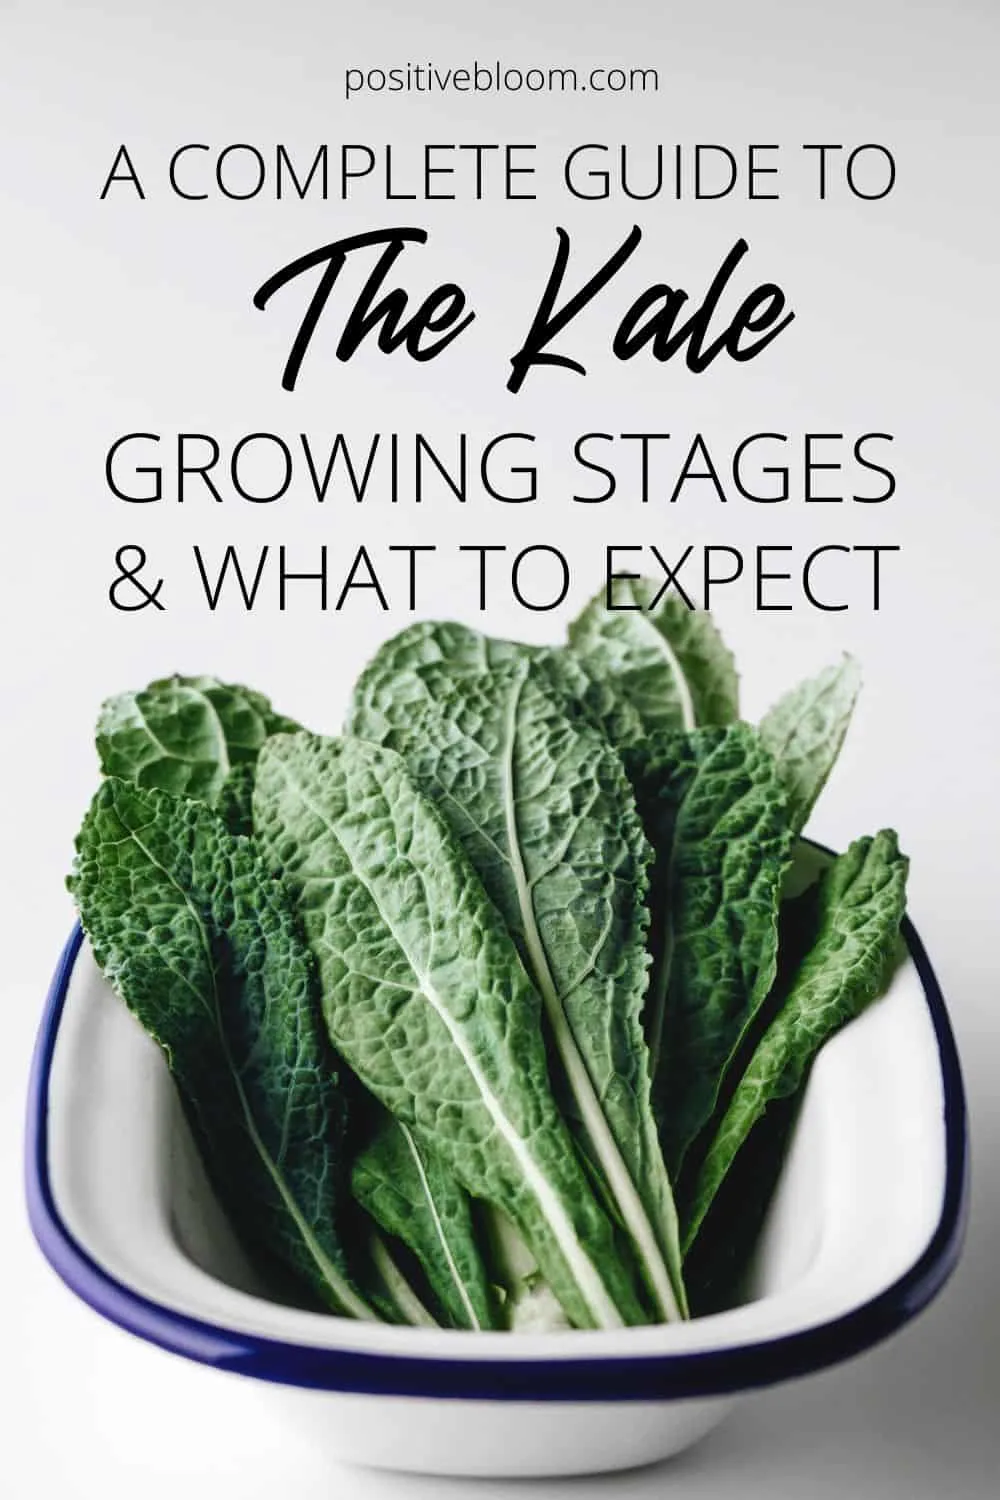 A Complete Guide To The Kale Growing Stages & What To Expect Pinterest